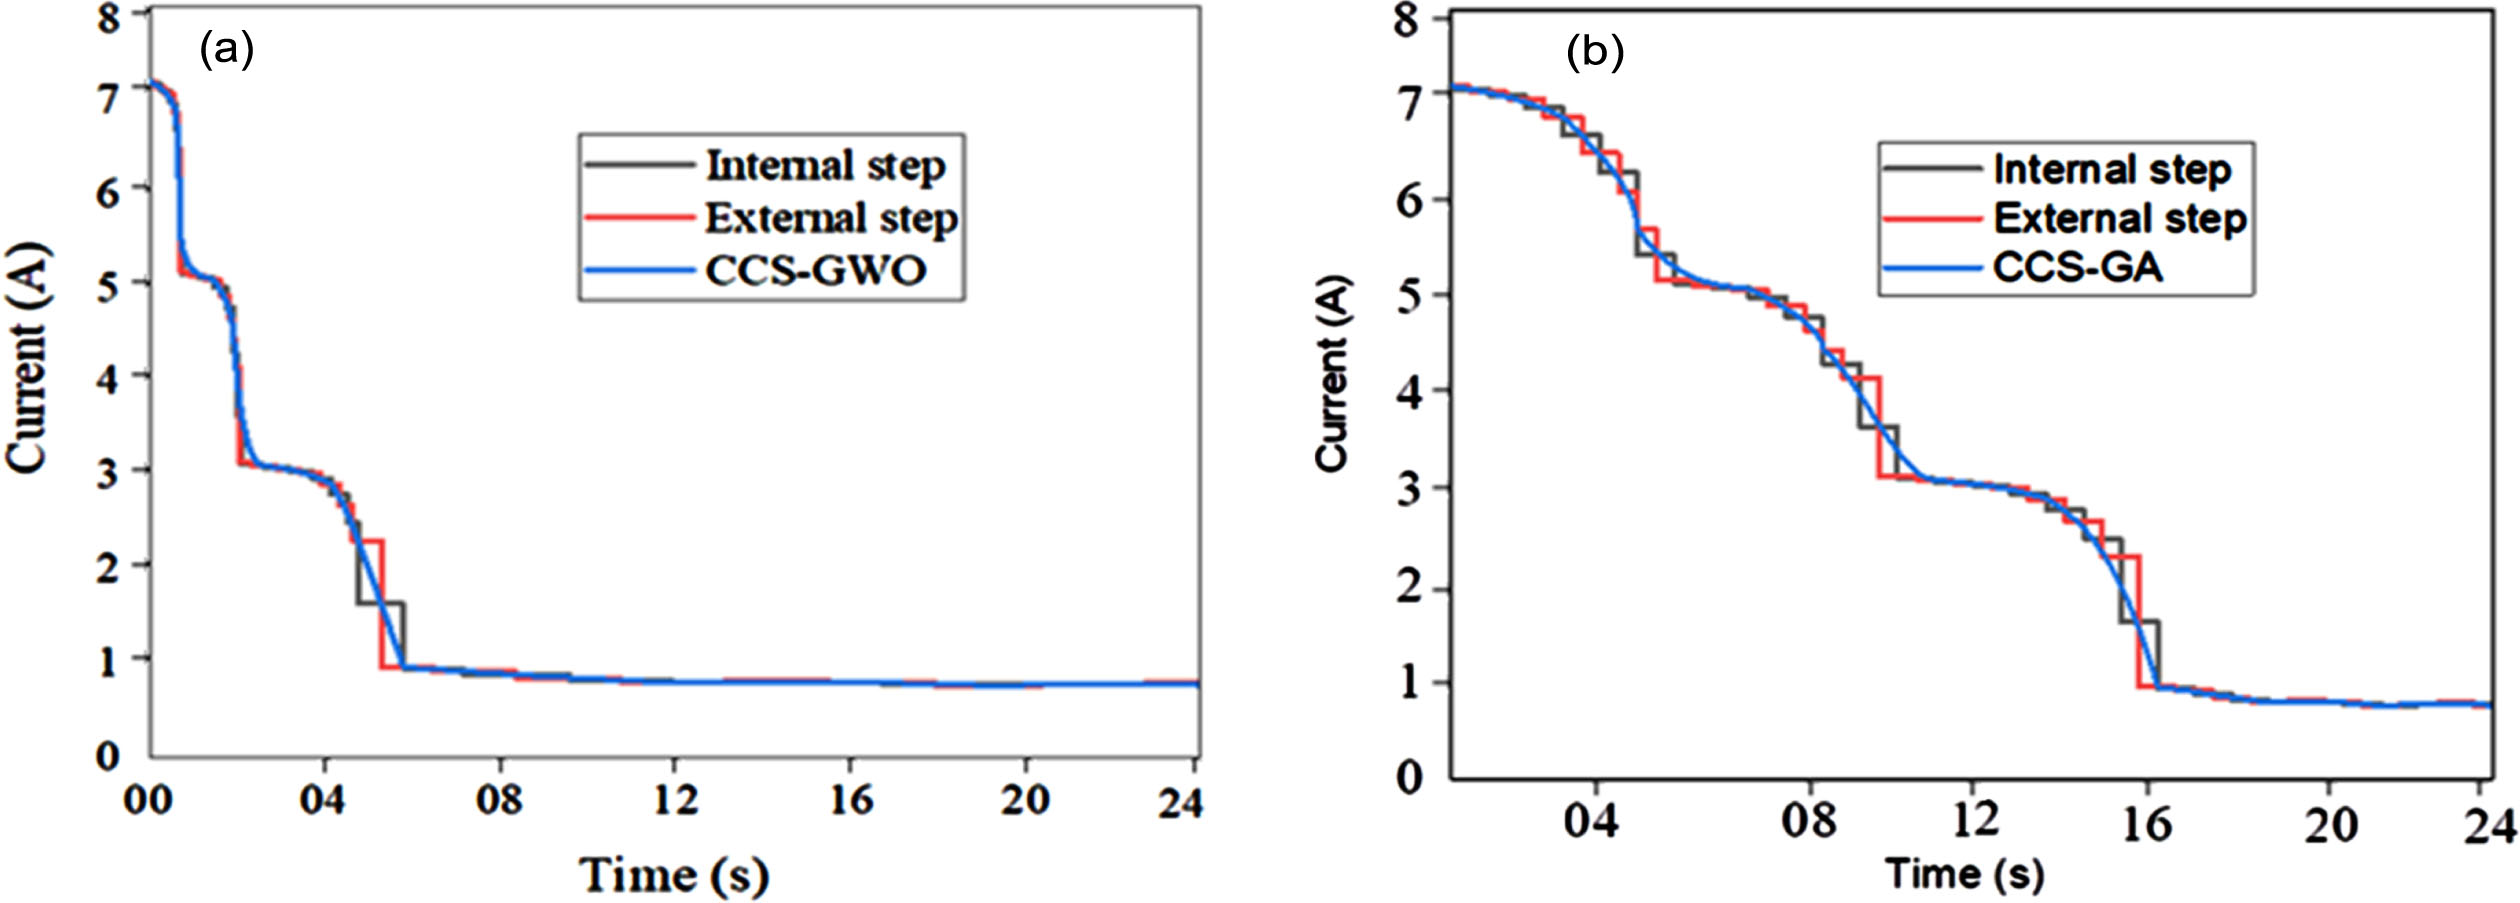 CCS-GWO, internal and external step curves (a) and CCS-GA, internal and external step curves (b) under partial shading conditions.